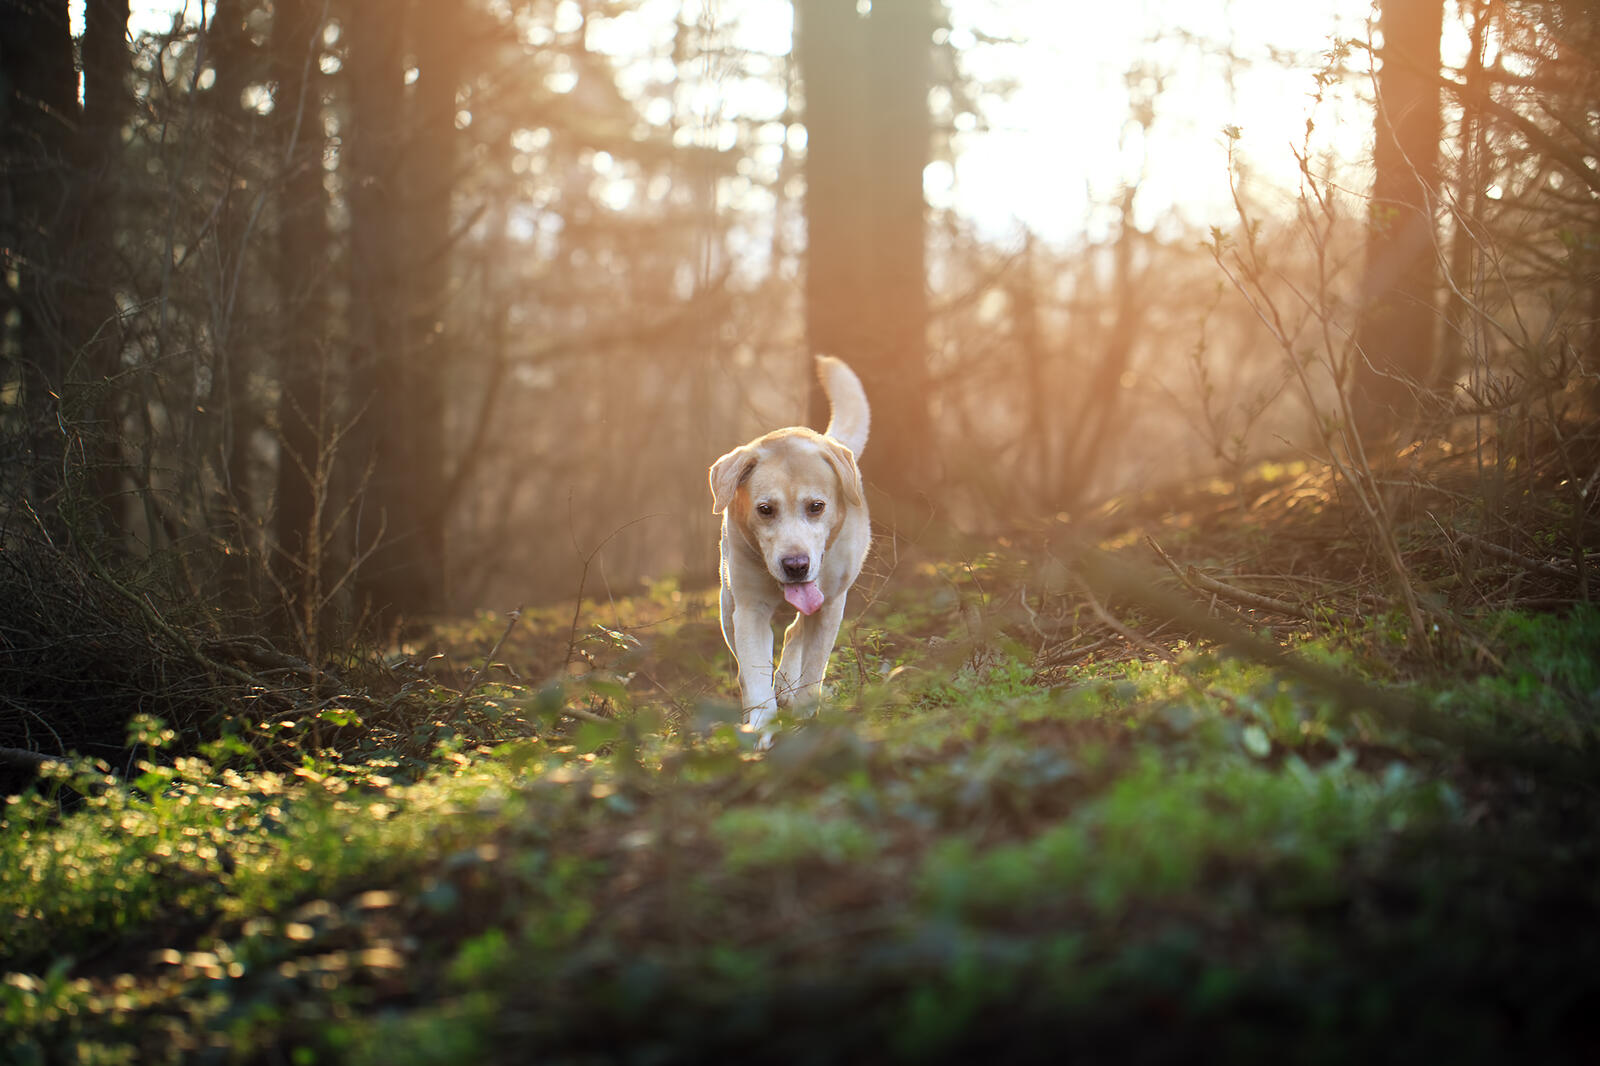 Free photo A Labrador runs through the woods with its tongue outstretched